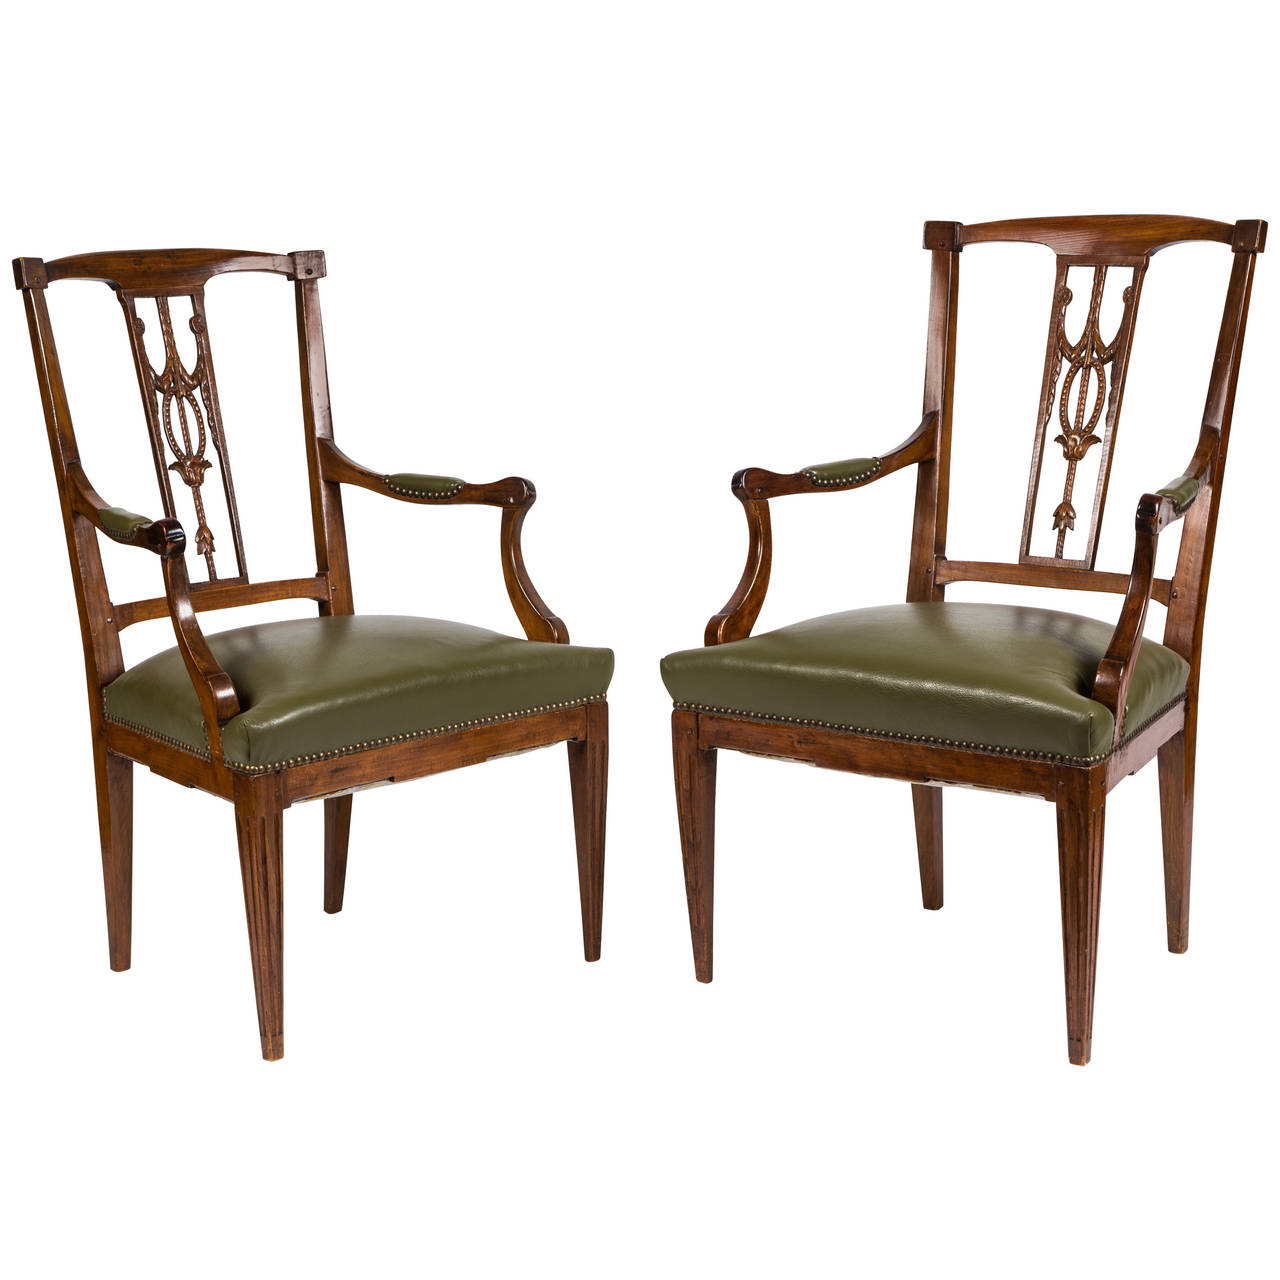 antique leather chairs, antique library chairs, leather library chairs | VANDEUREN